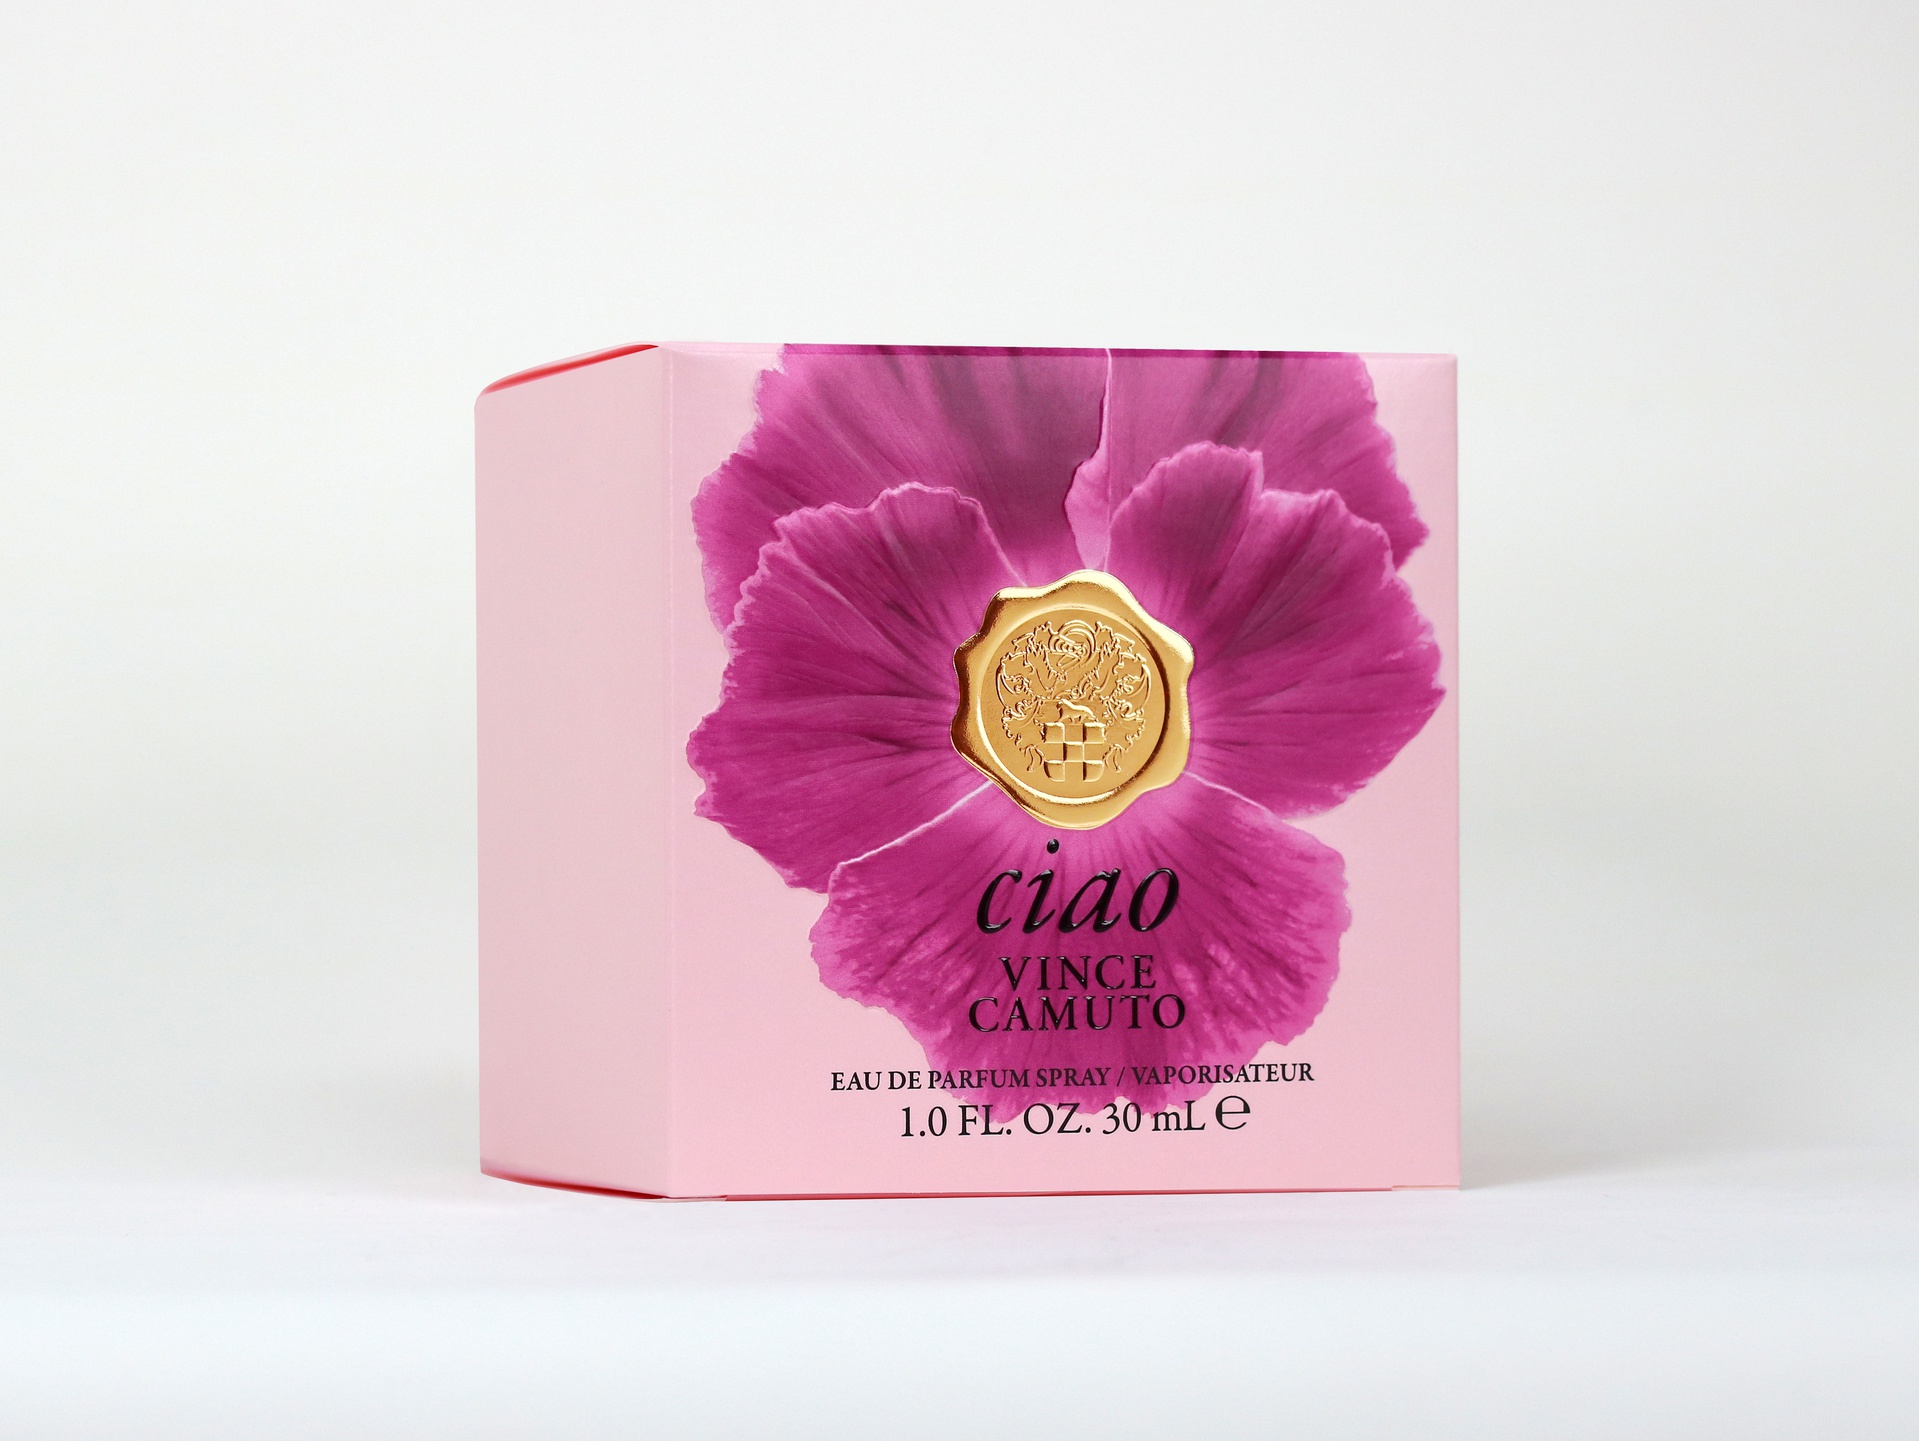 Ciao Vince Camuto packaging